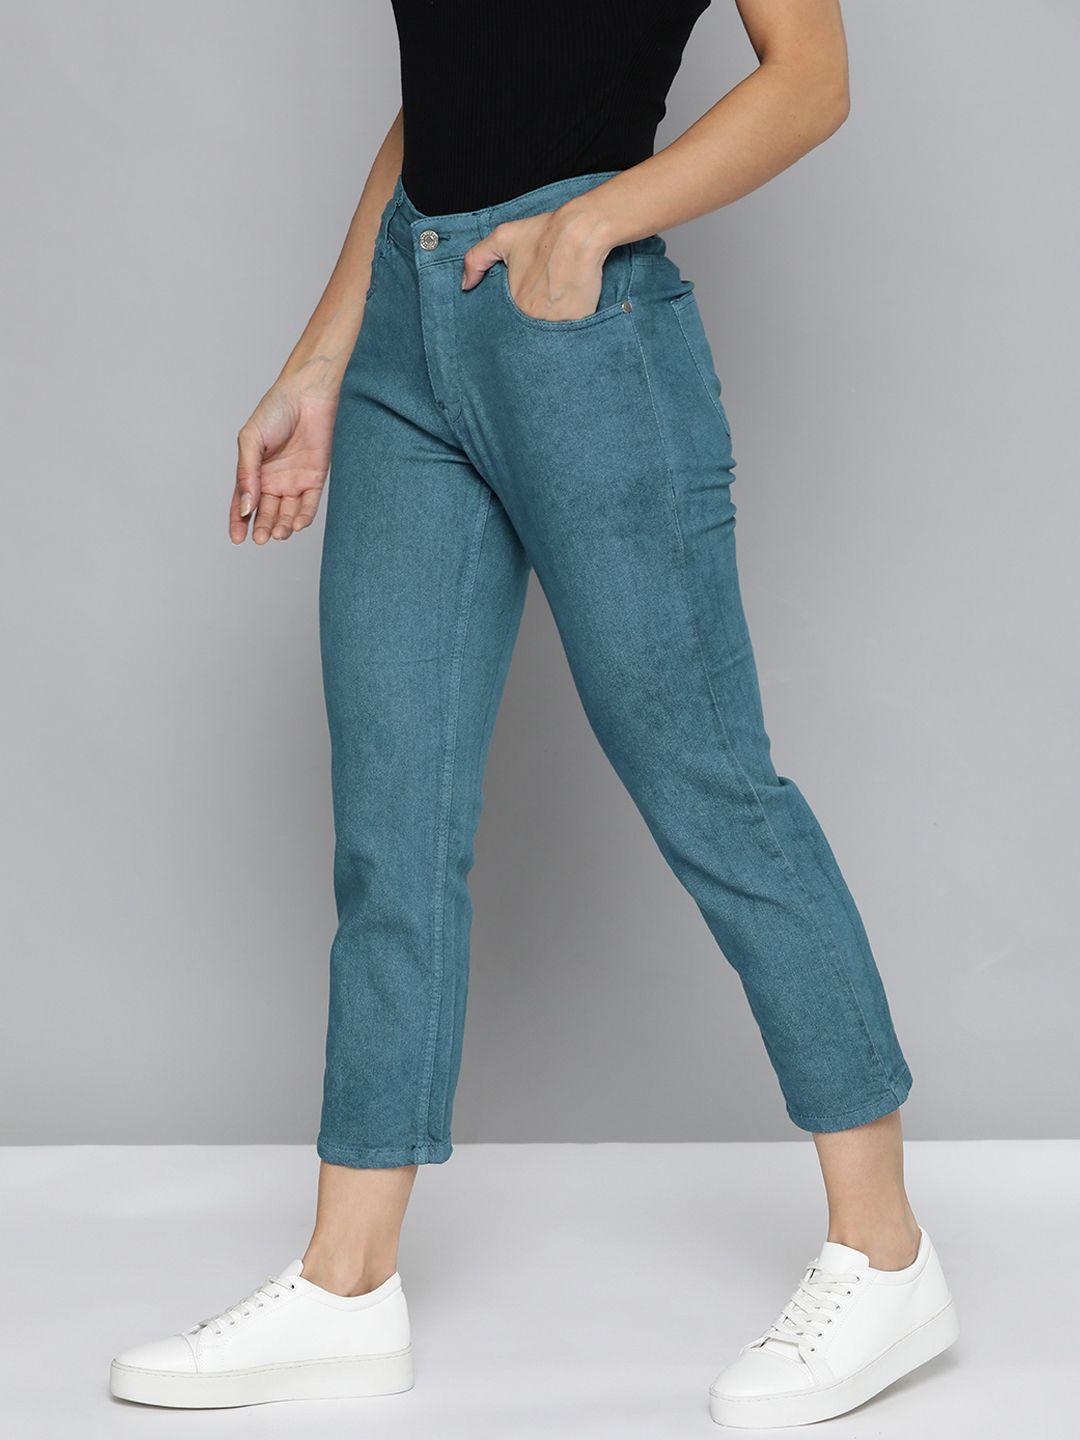 harvard women teal green straight fit stretchable jeans